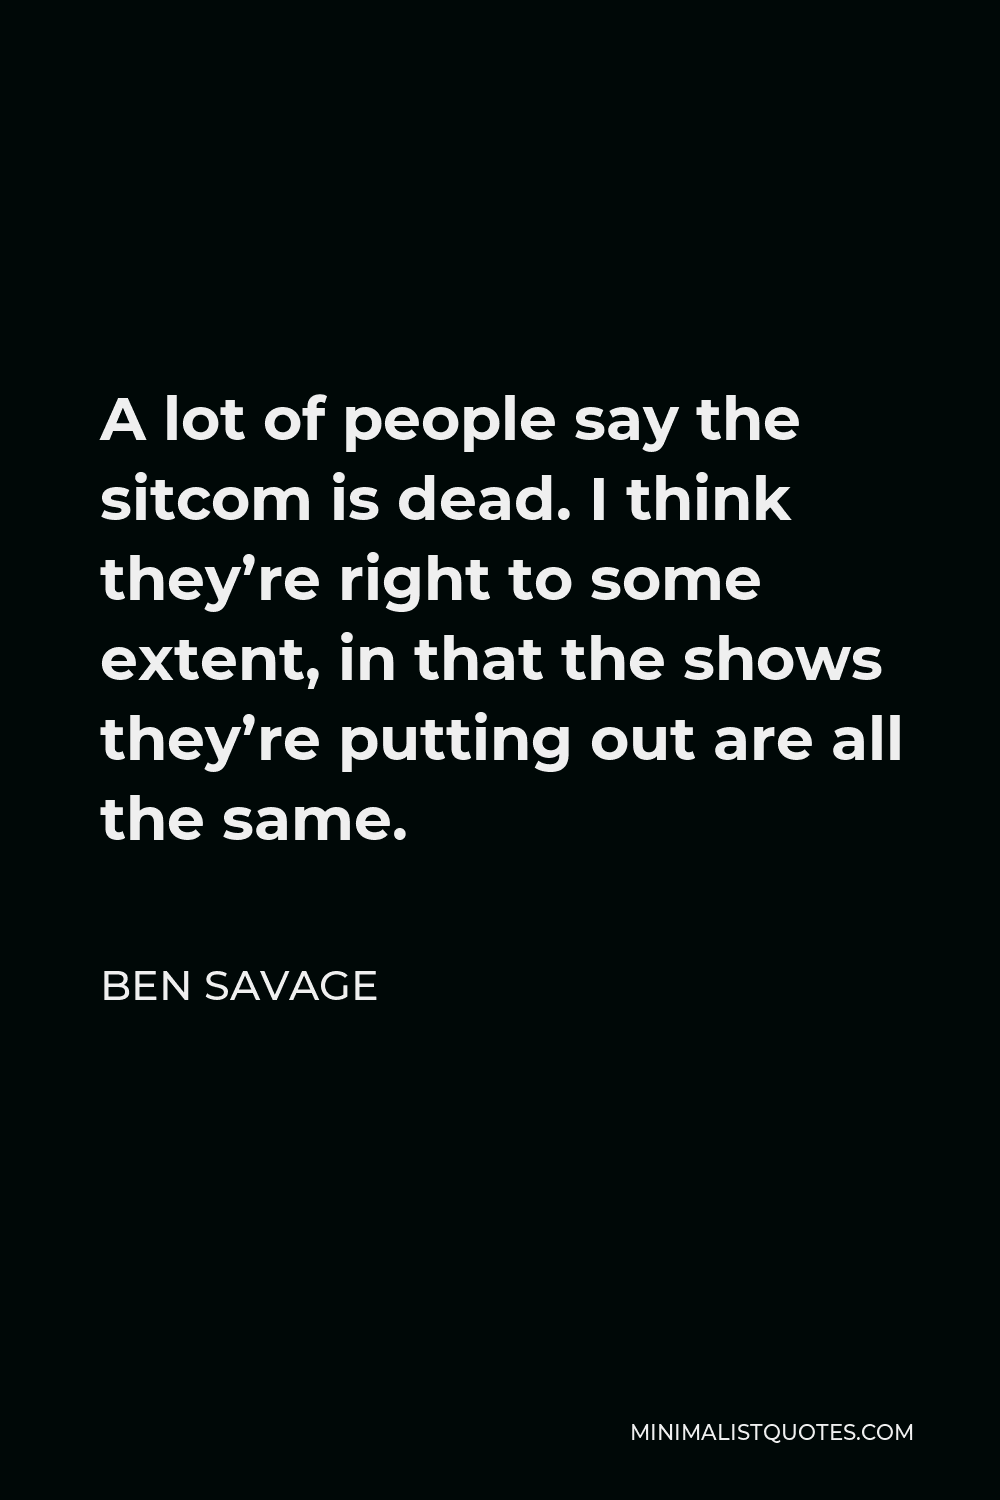 Ben Savage Quote - A lot of people say the sitcom is dead. I think they’re right to some extent, in that the shows they’re putting out are all the same.